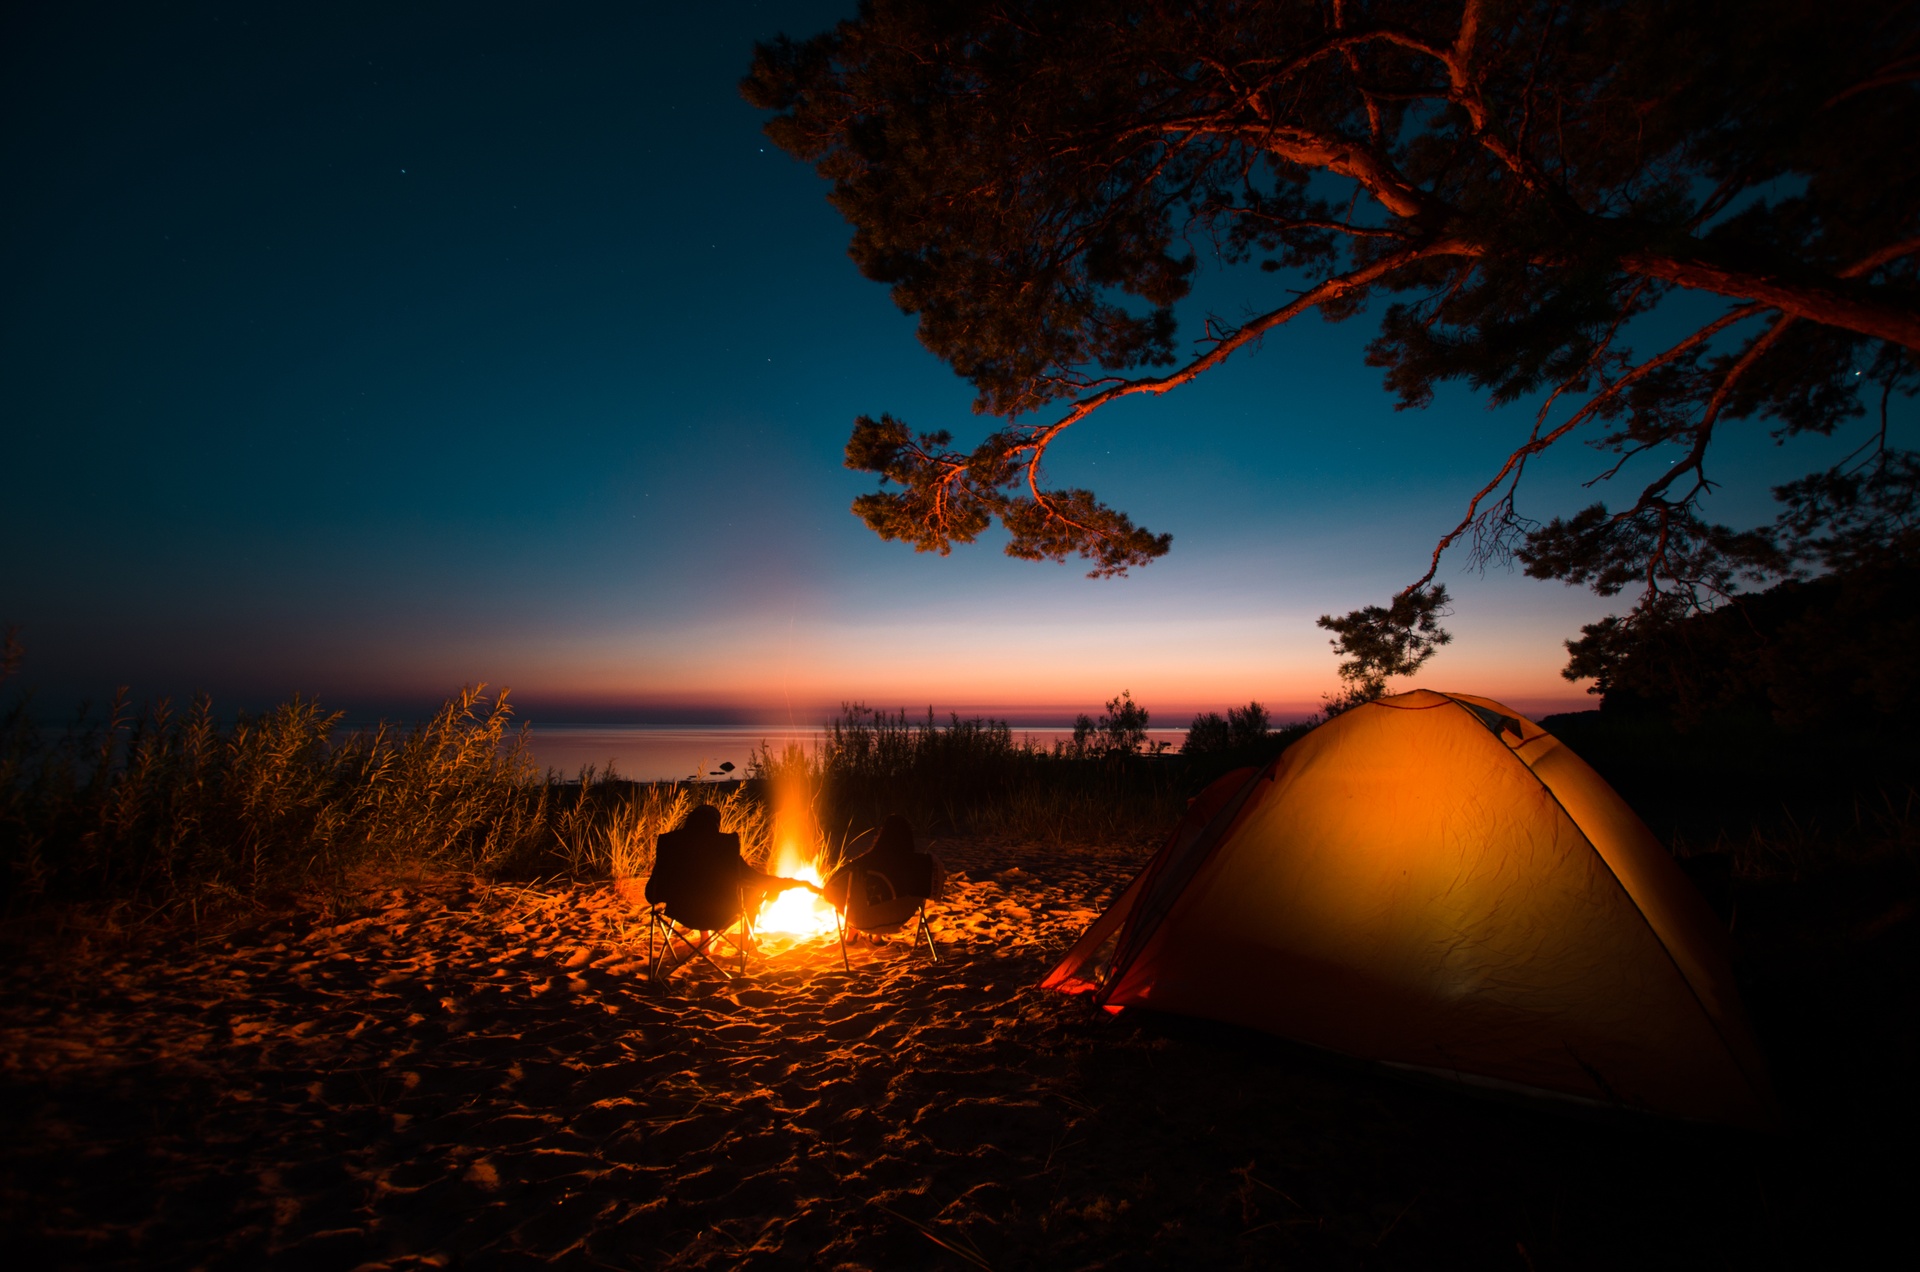 camping at the night time